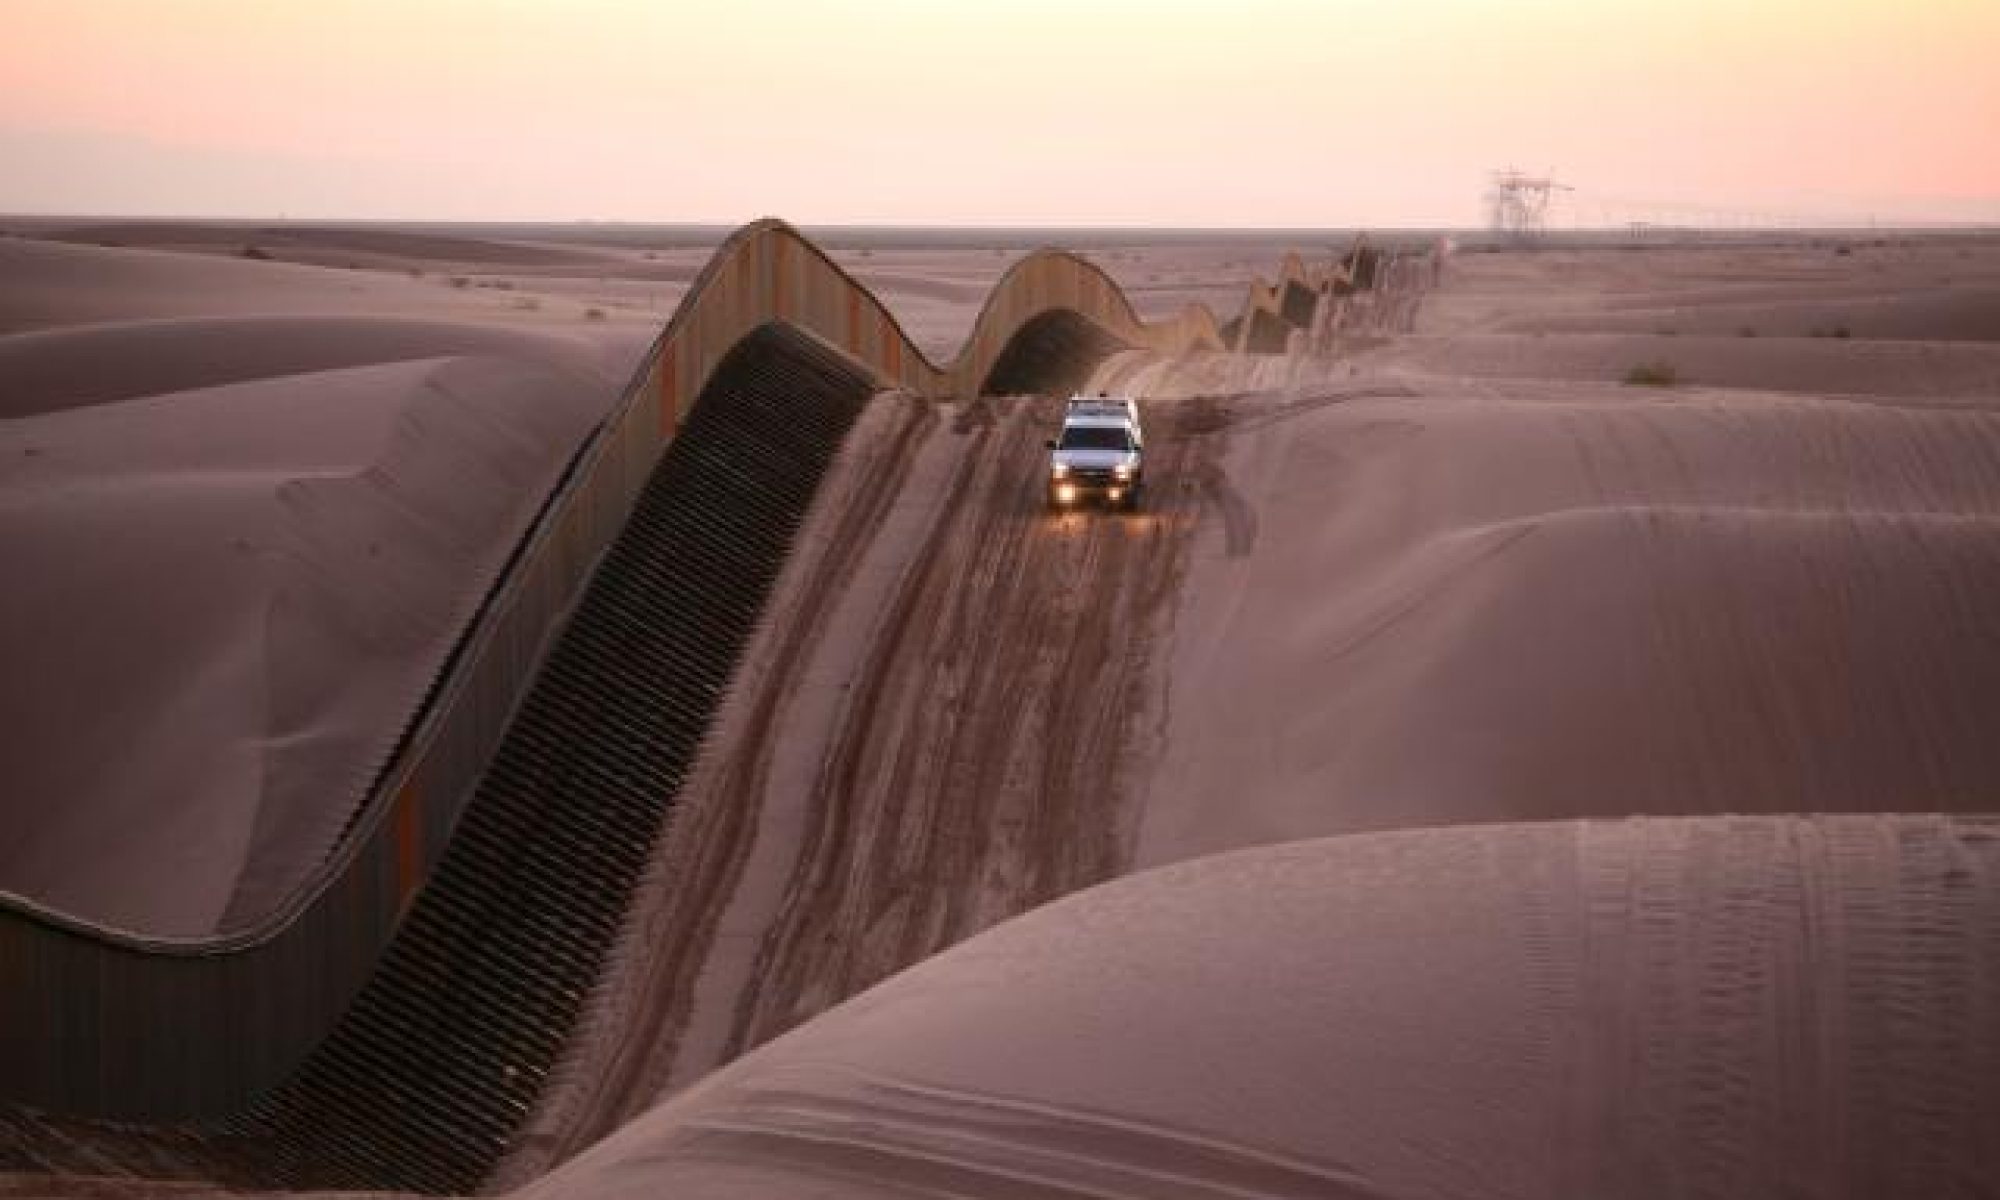 An image of a white truck driving down a sand dune